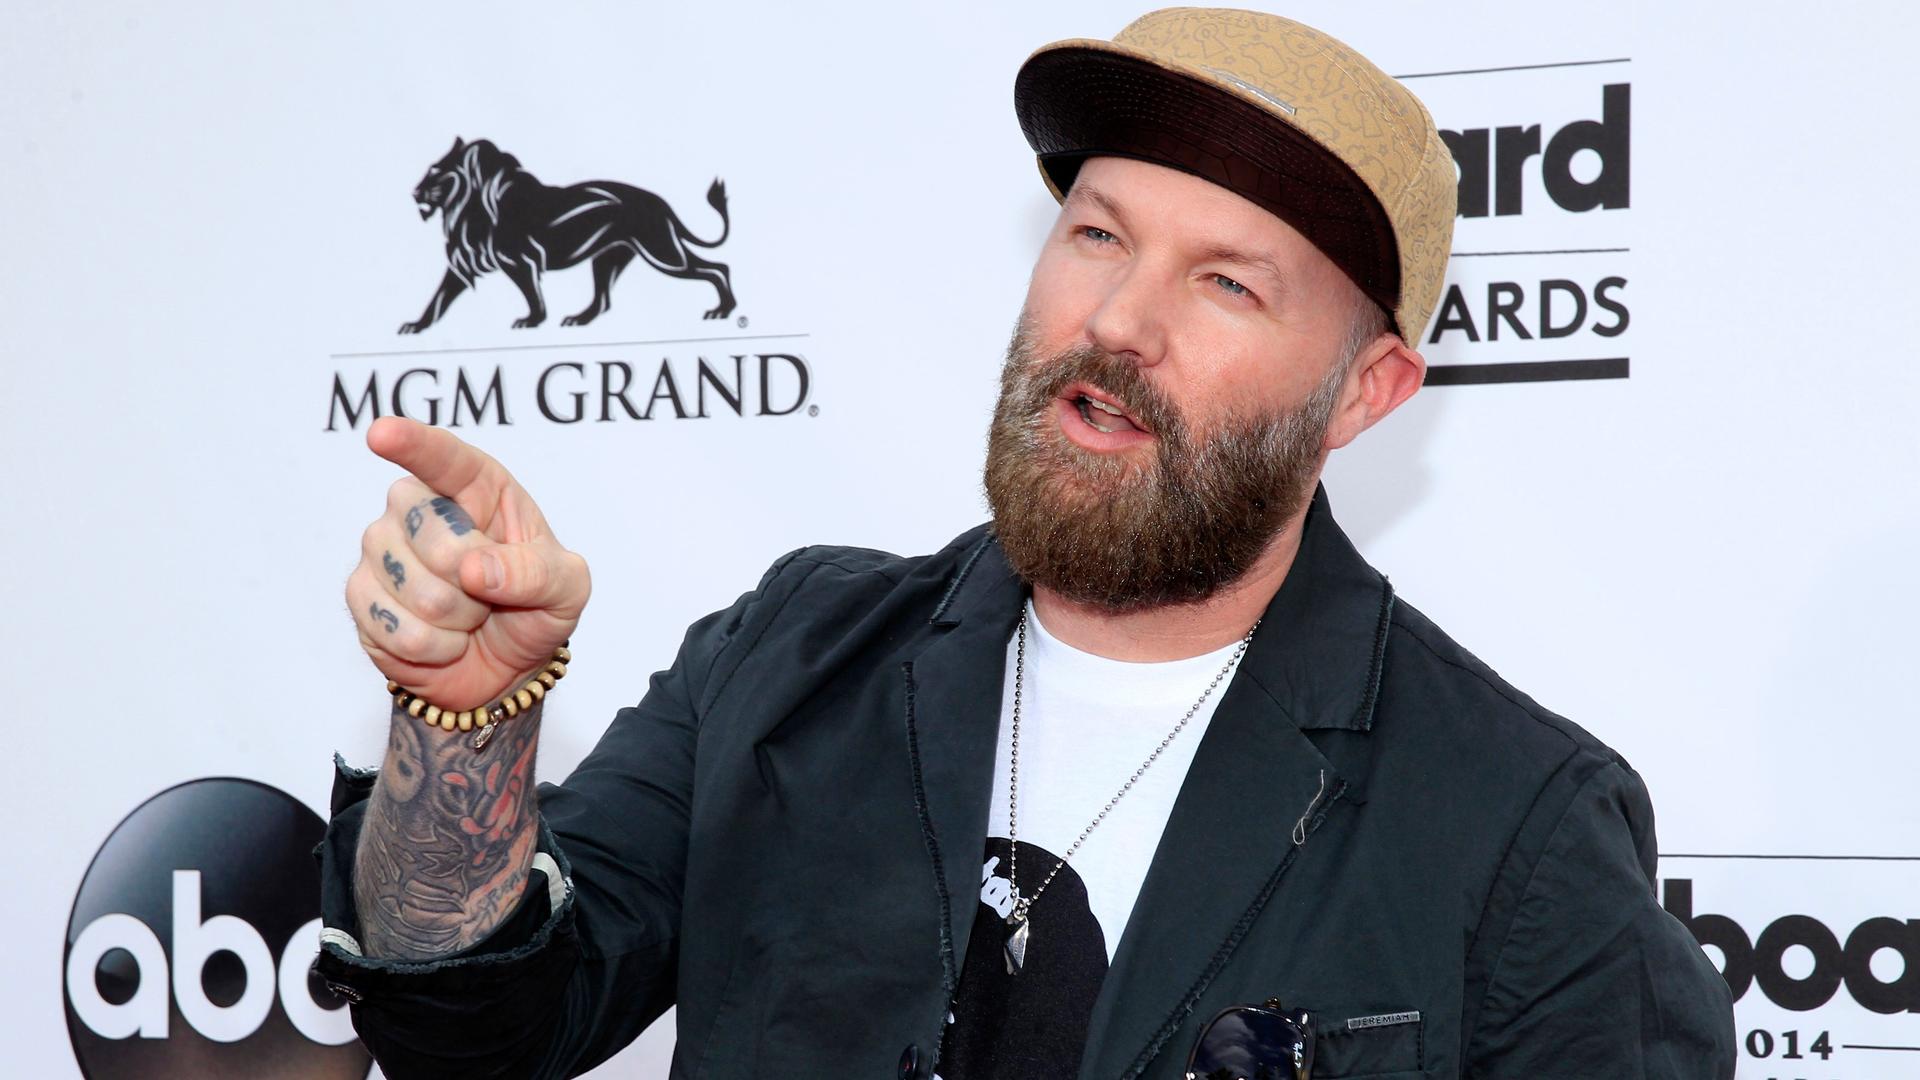 You gotta have faith: Limp Bizkit front man is so enamored with Russia ...